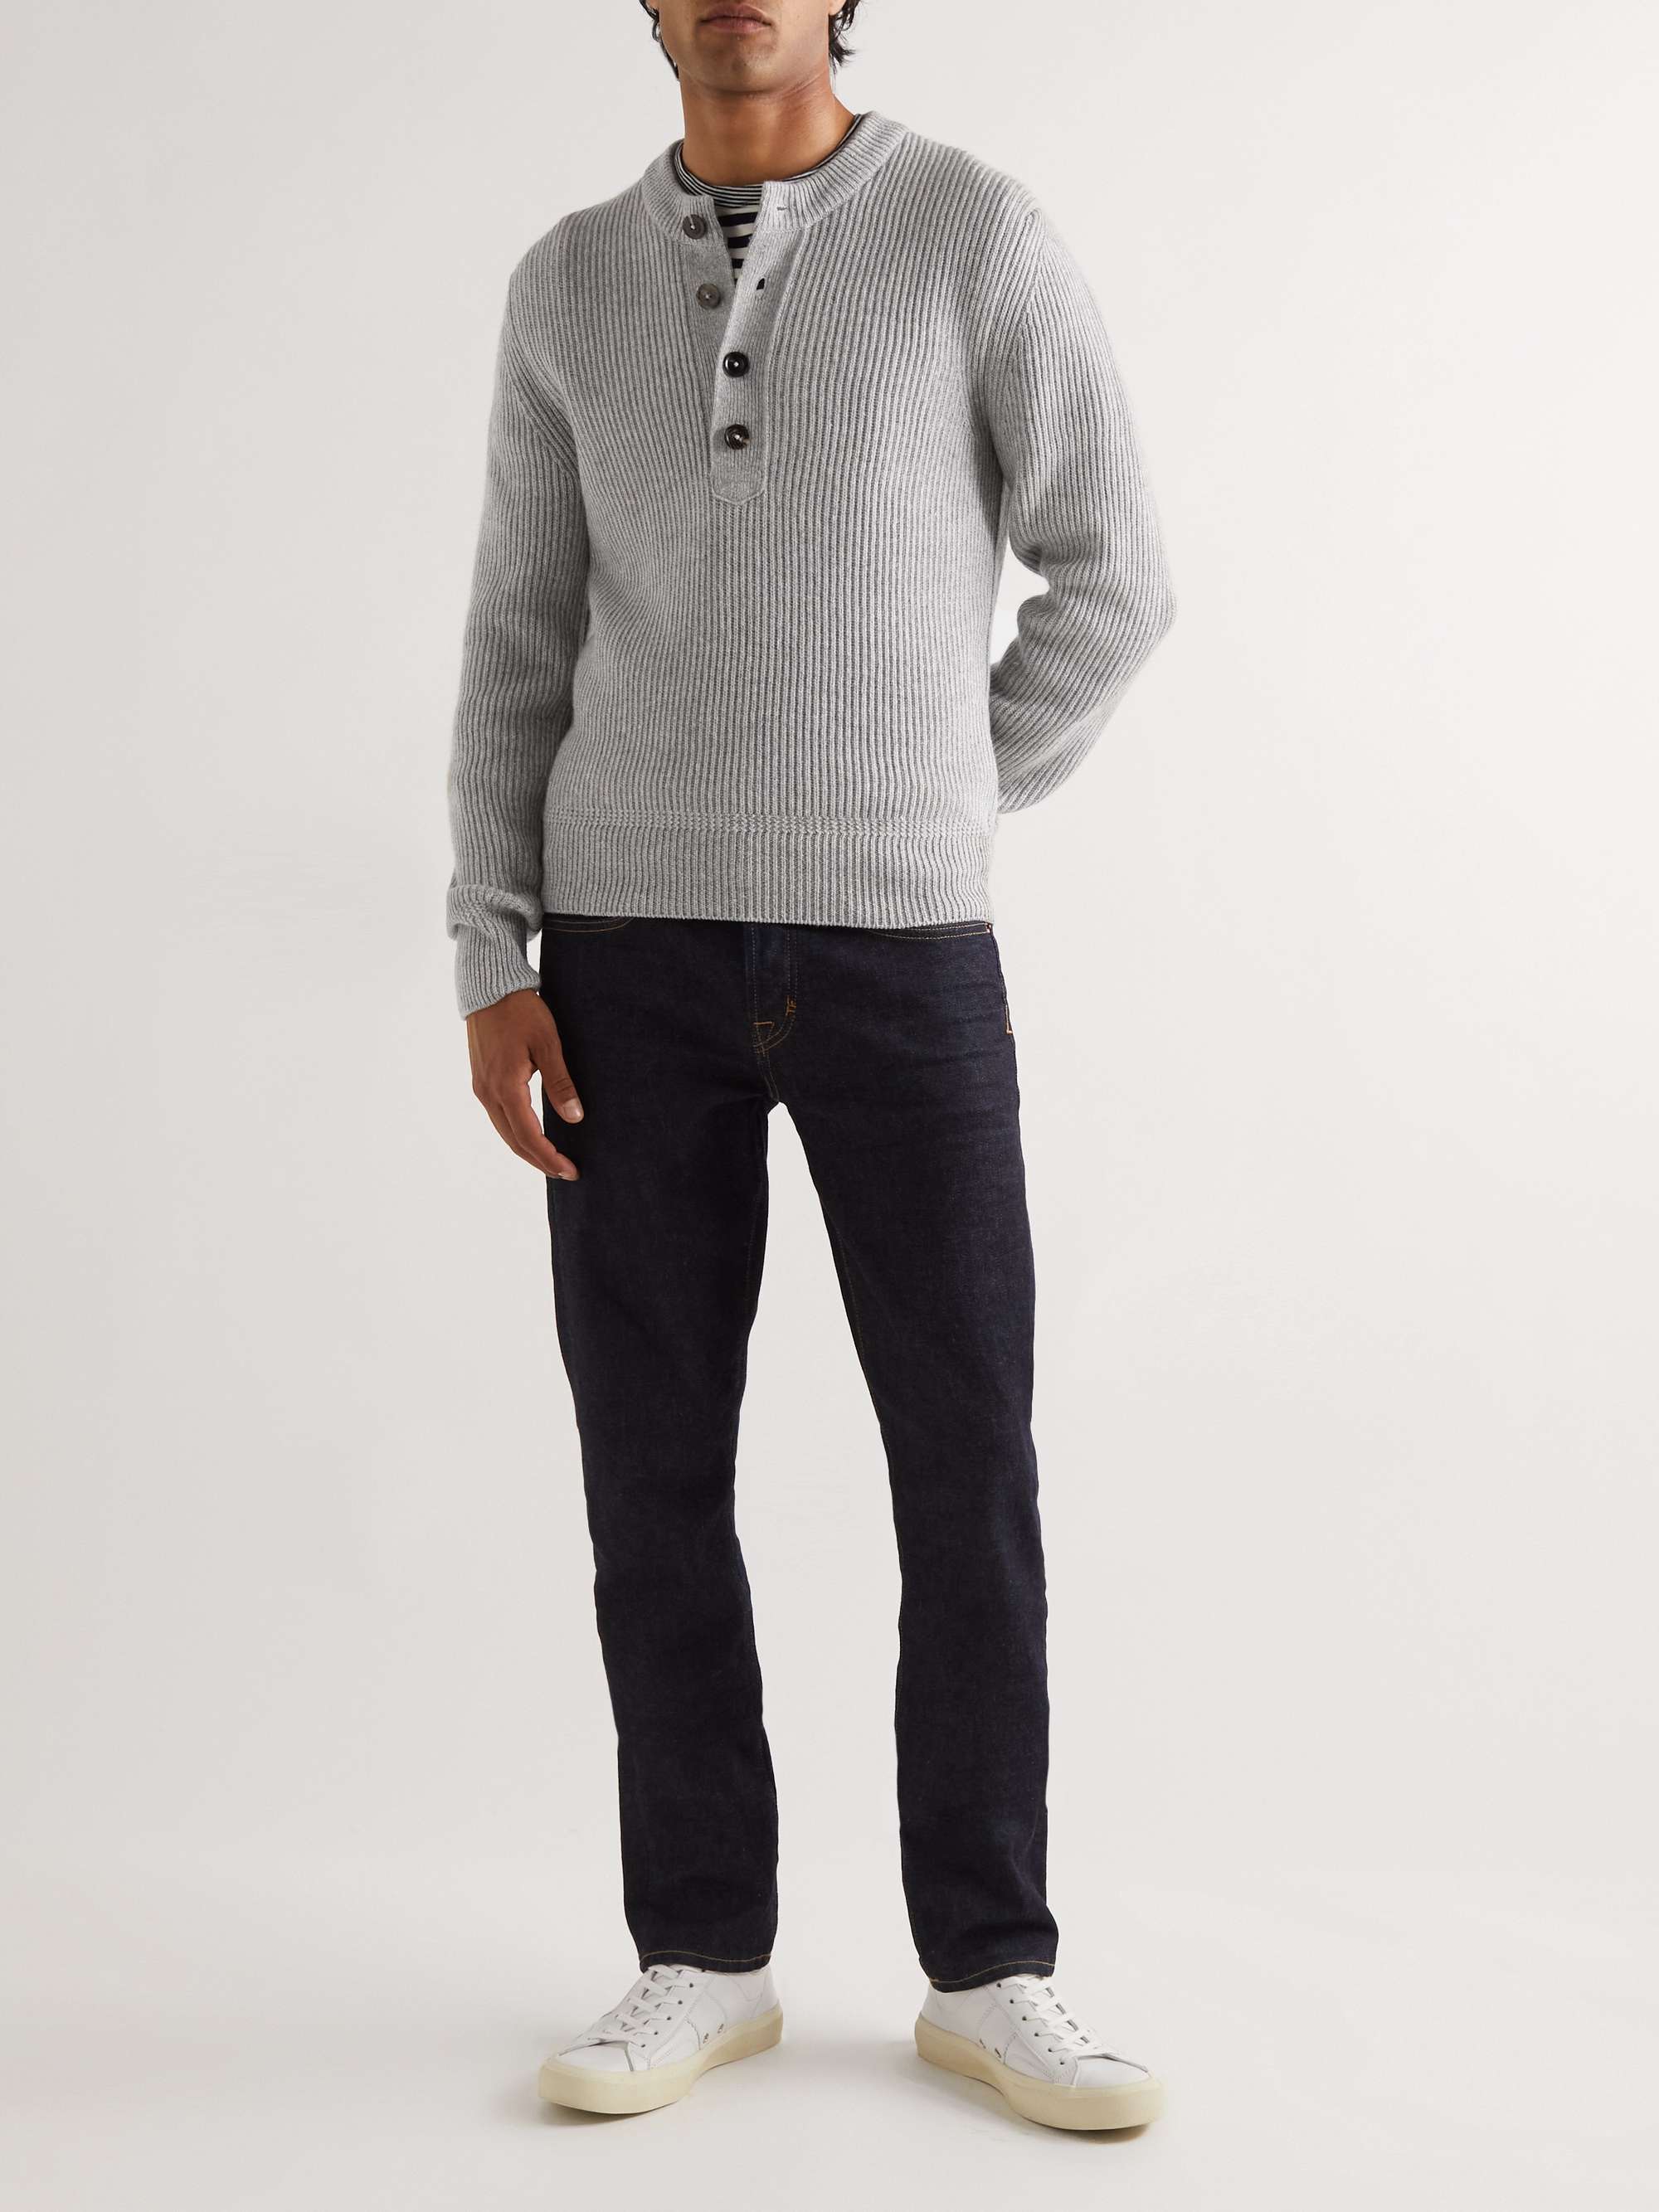 TOM FORD Ribbed Cashmere and Linen-Blend Sweater